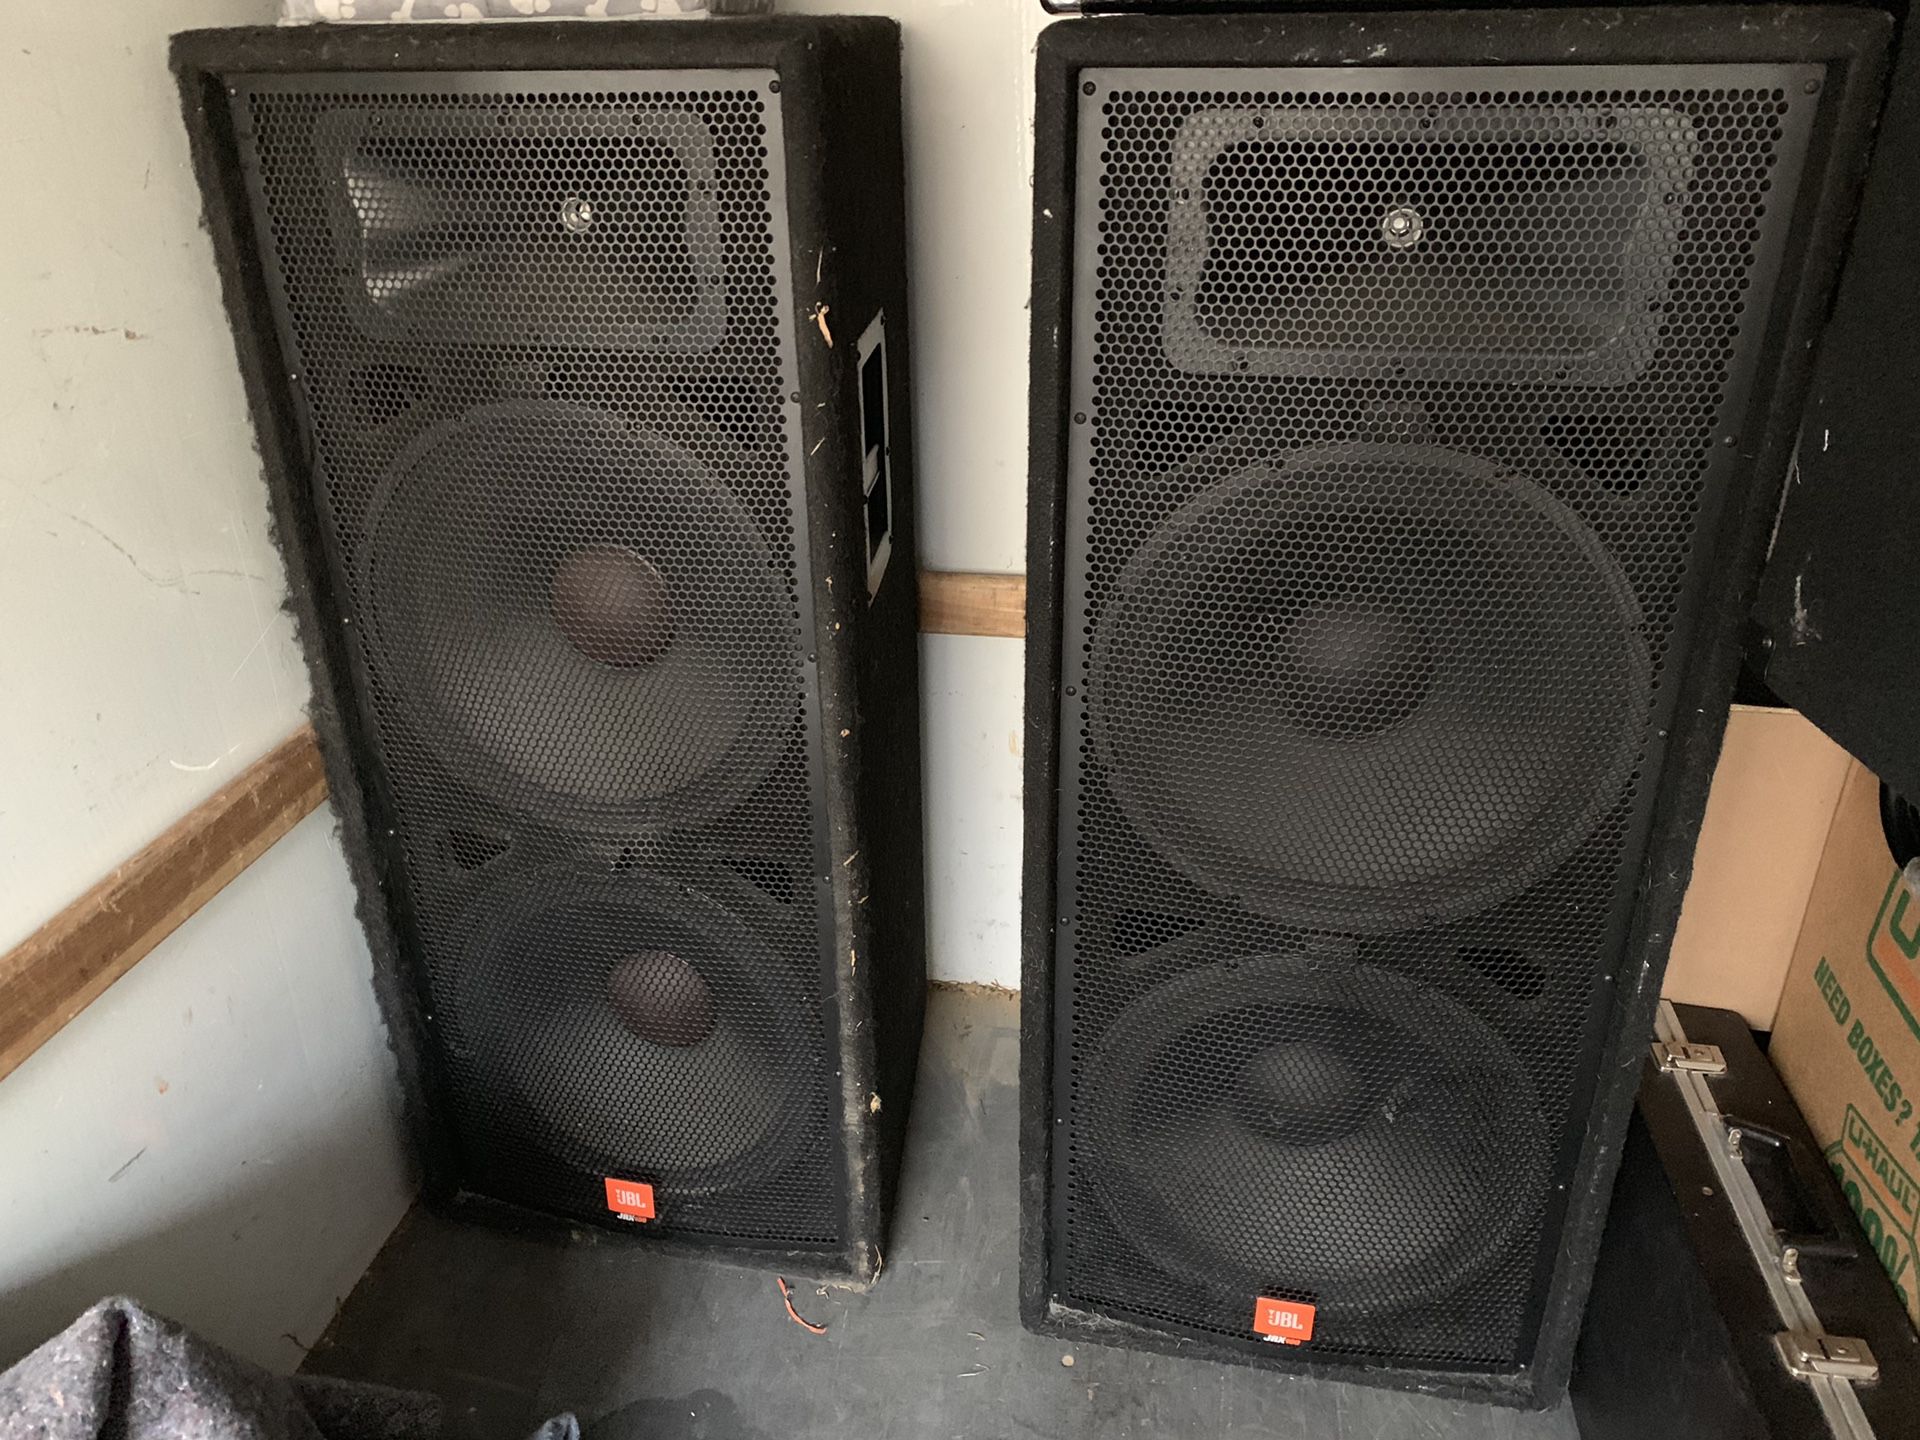 Jbl speakers !!!! Everything must go. Serious inquires only!!!